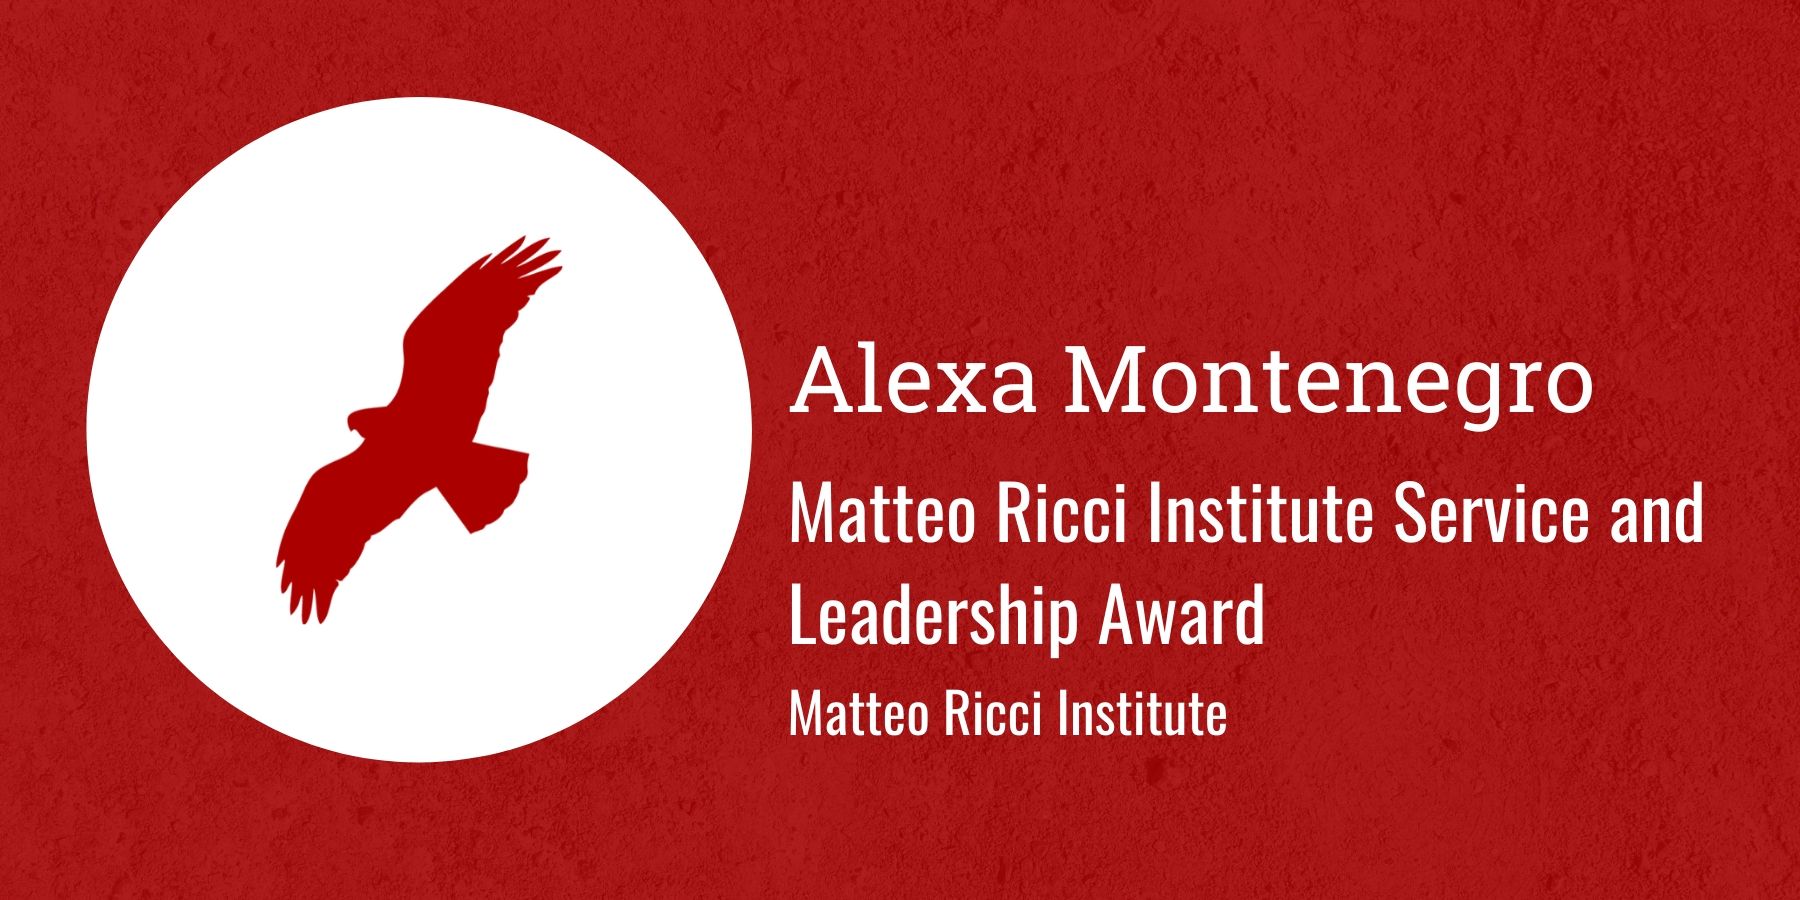 Image of Redhawk and Text: Matteo Ricci Institute Service and Leadership Award